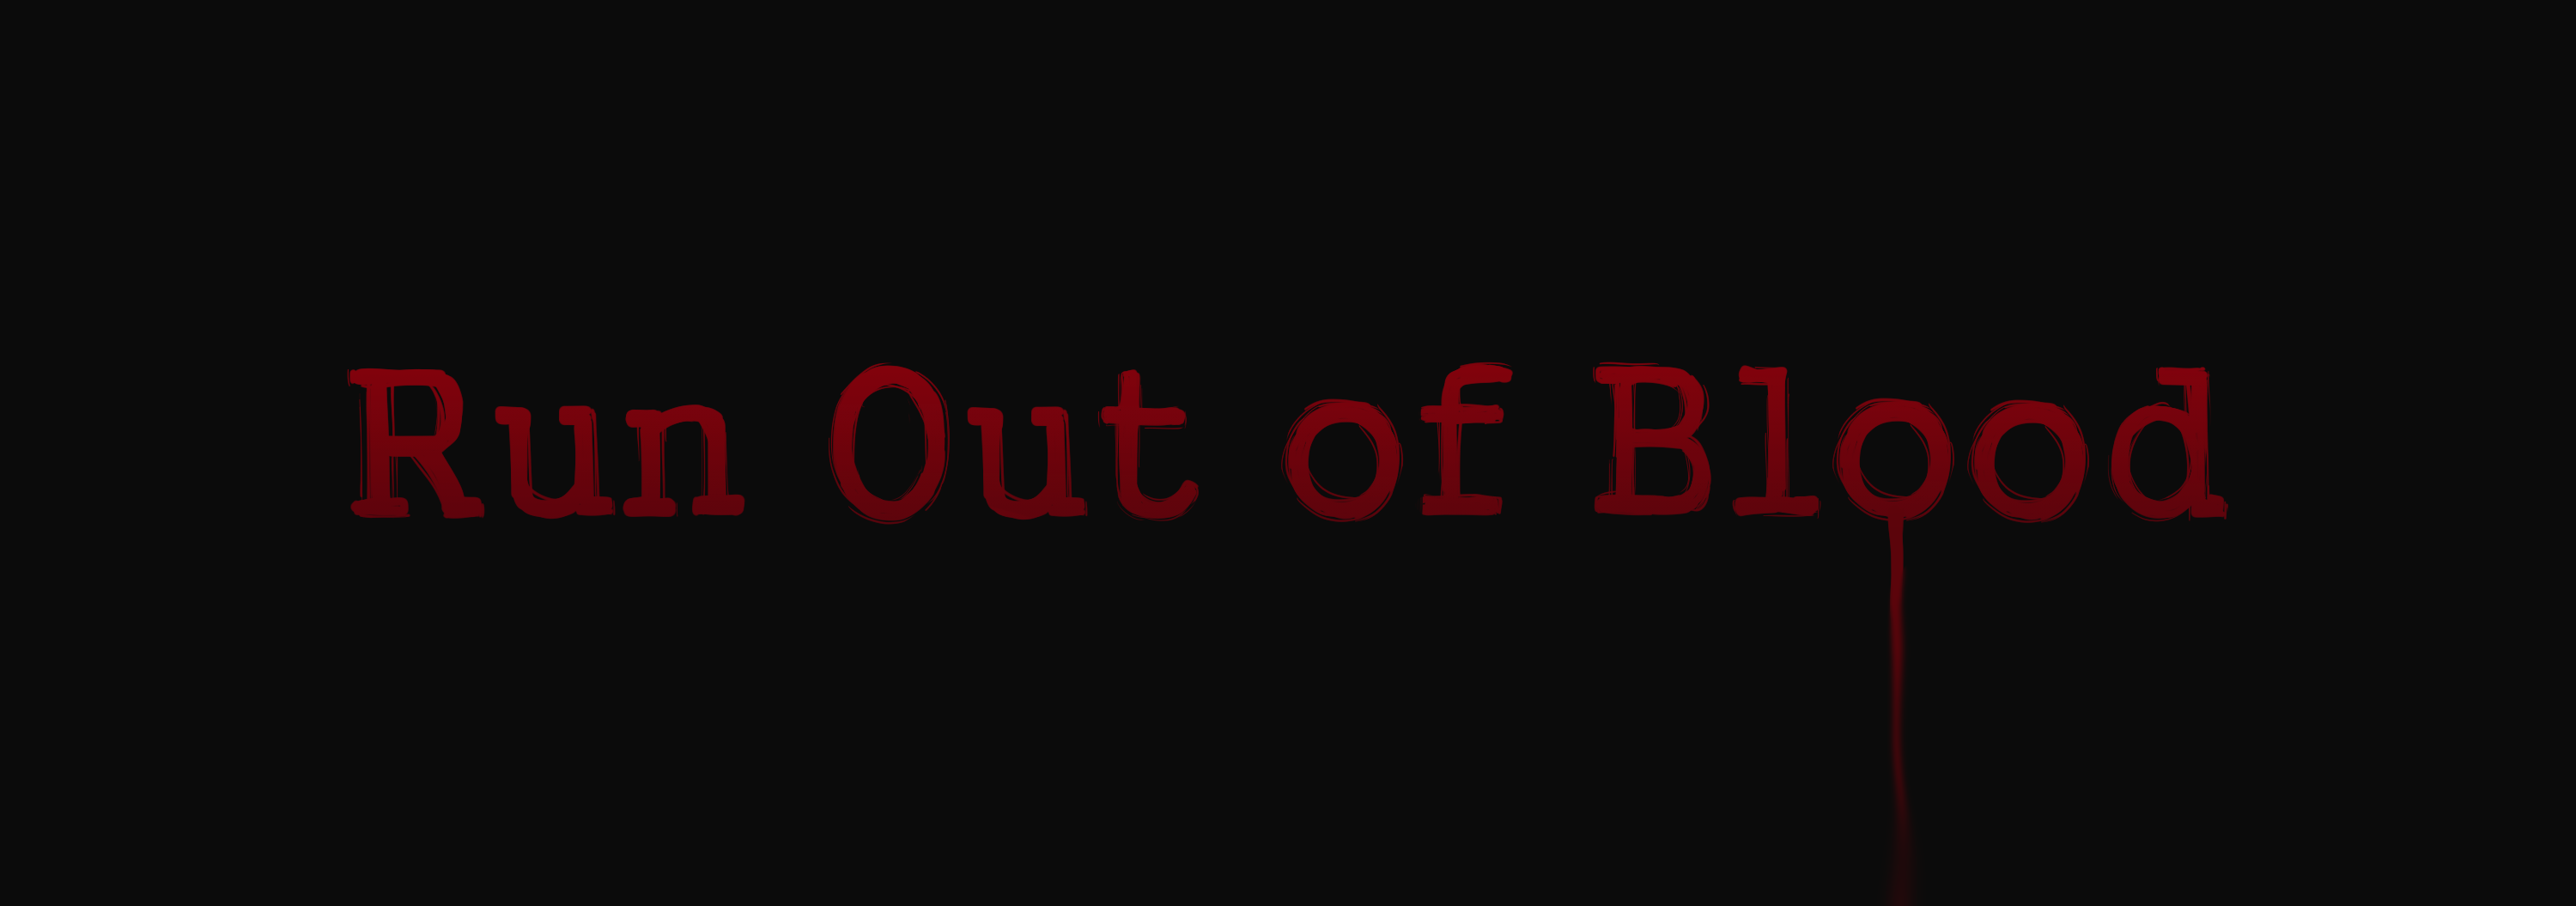 Run Out of Blood